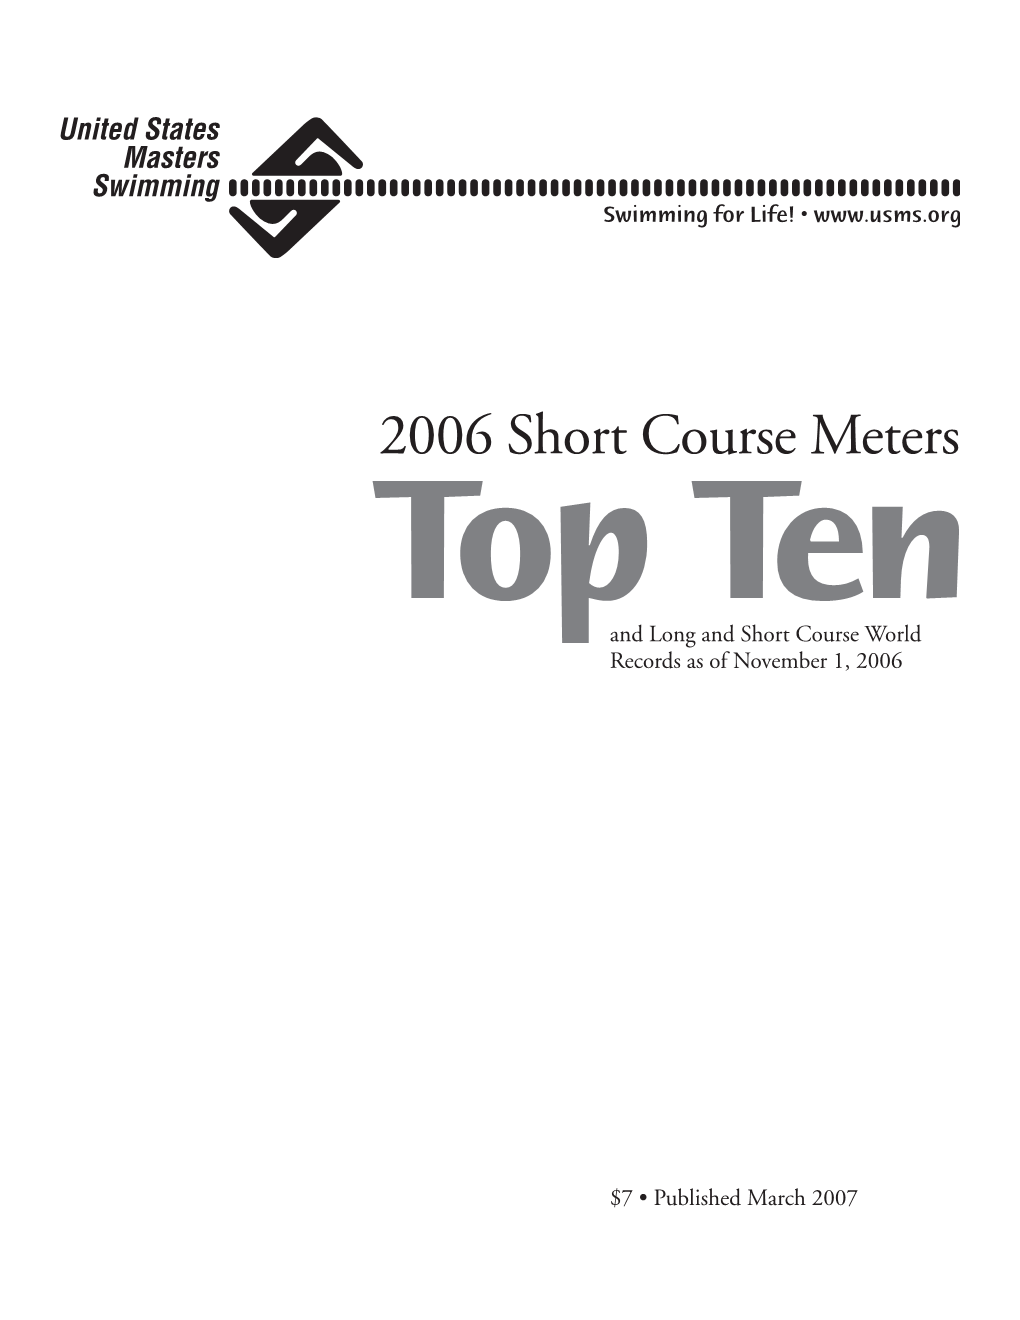 2006 Short Course Meters Top Ten and Long and Short Course World Records As of November 1, 2006